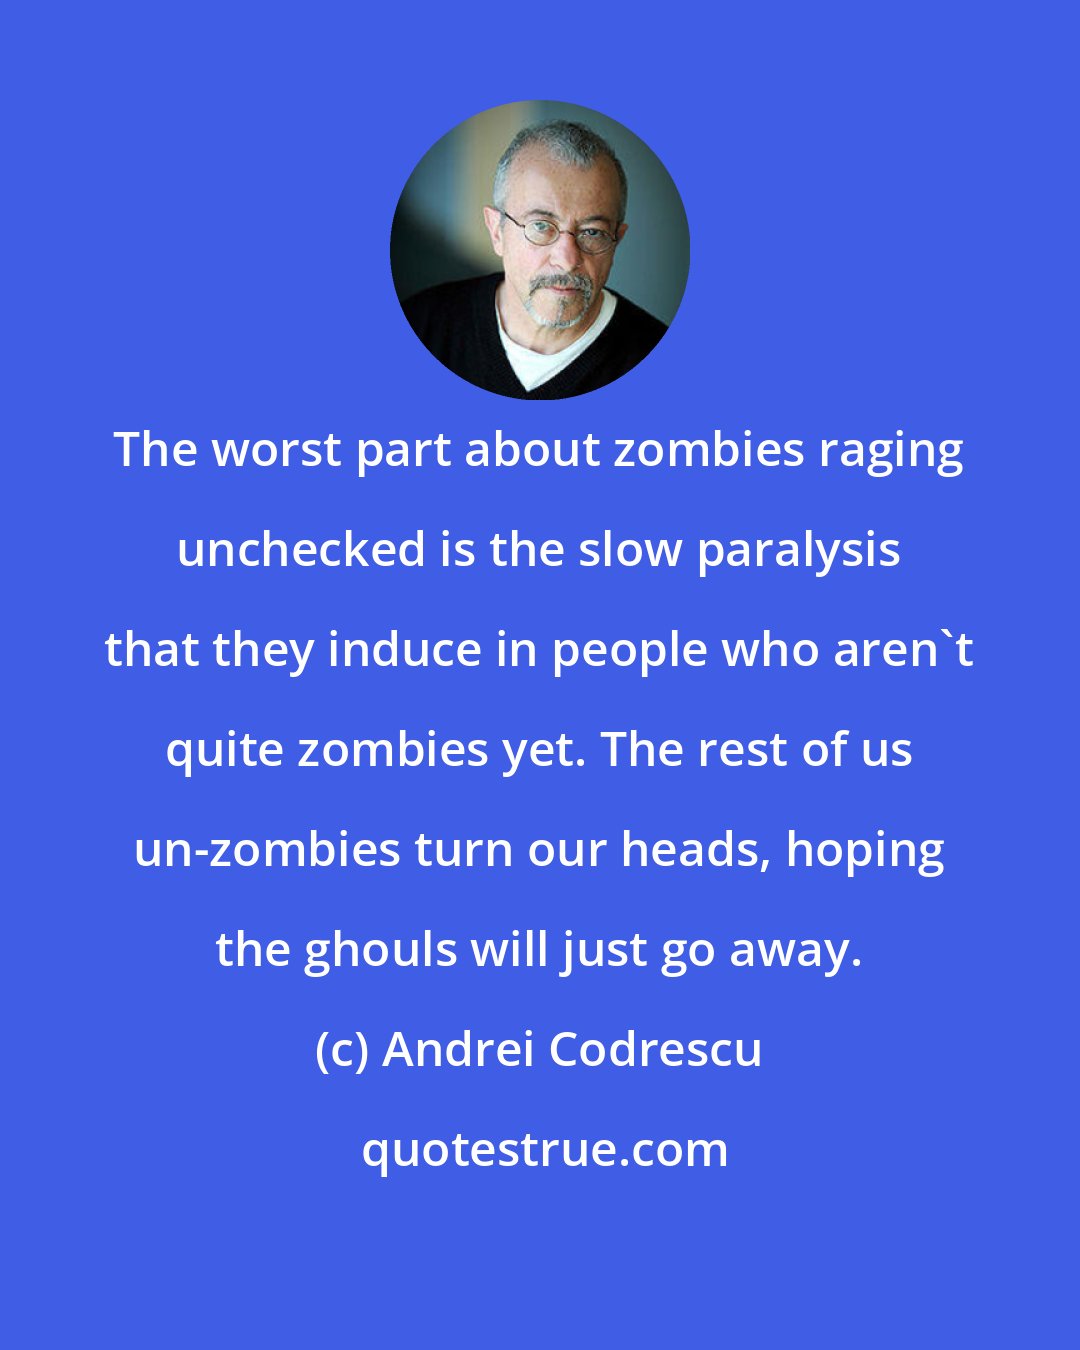 Andrei Codrescu: The worst part about zombies raging unchecked is the slow paralysis that they induce in people who aren't quite zombies yet. The rest of us un-zombies turn our heads, hoping the ghouls will just go away.